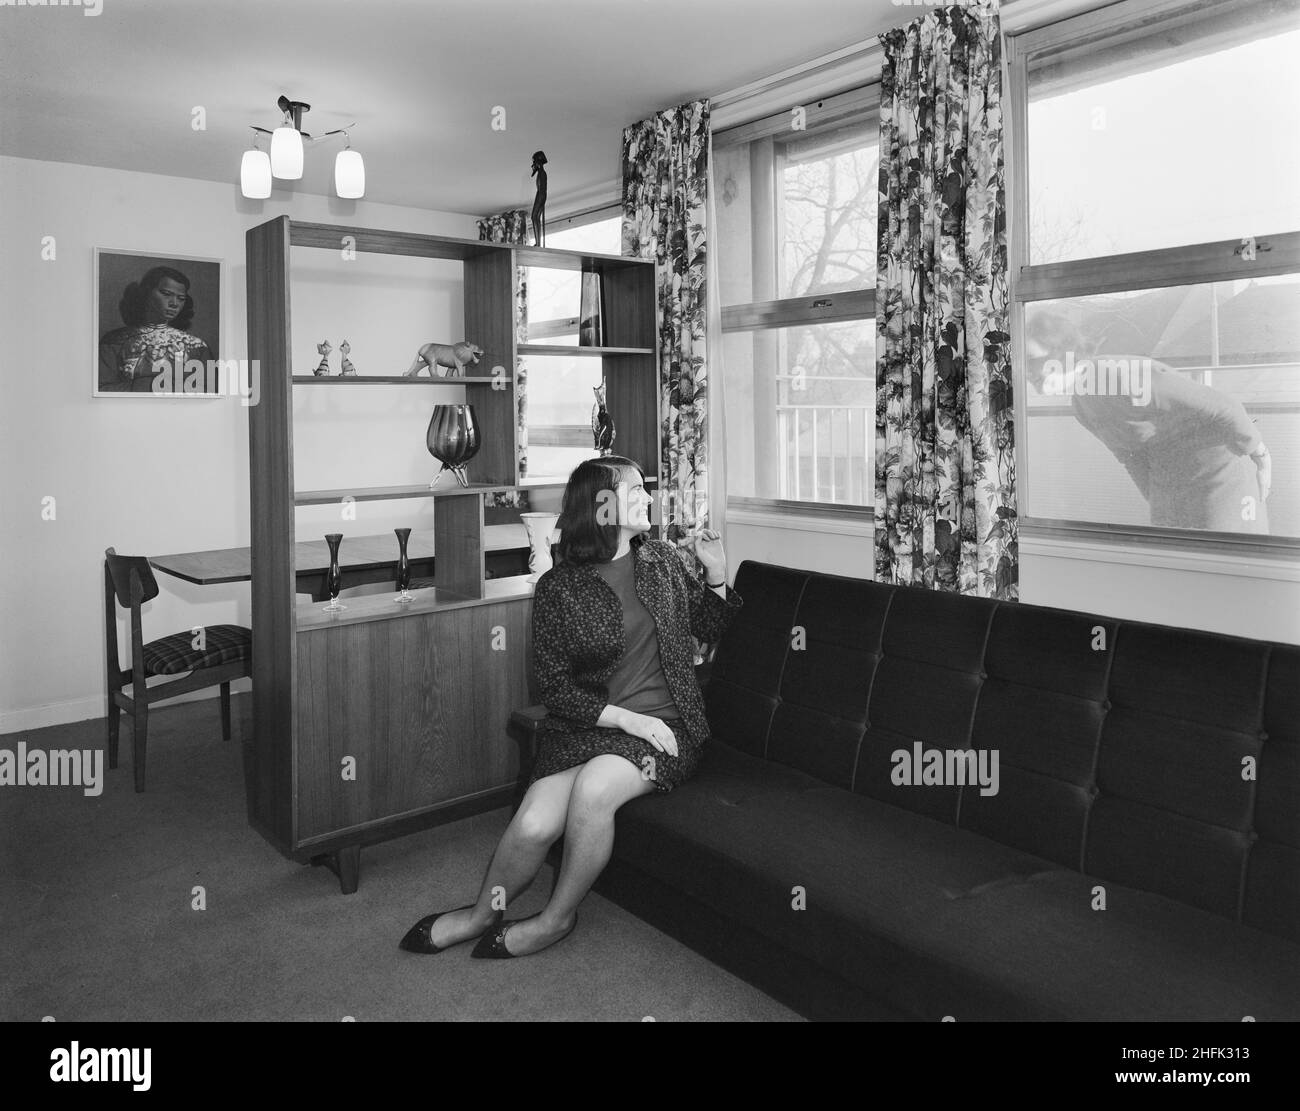 Bearwood House, Bearwood Road, Smethwick, Sandwell, 02/02/1966. A young woman sitting in the lounge-diner of a flat at Bearwood House, waving to a friend outside. 'Sectra' was a French prefabricated steel formwork design for flats which John Laing and Son Ltd acquired the British rights to in 1962. It was a method of using precision made steel formwork for the placing of structural concrete in 'tunnel' sections in room unit widths and ceiling heights. The units were bolted together in rows on special tracks, with the concrete poured to form the walls and floors in one operation. The formwork w Stock Photo